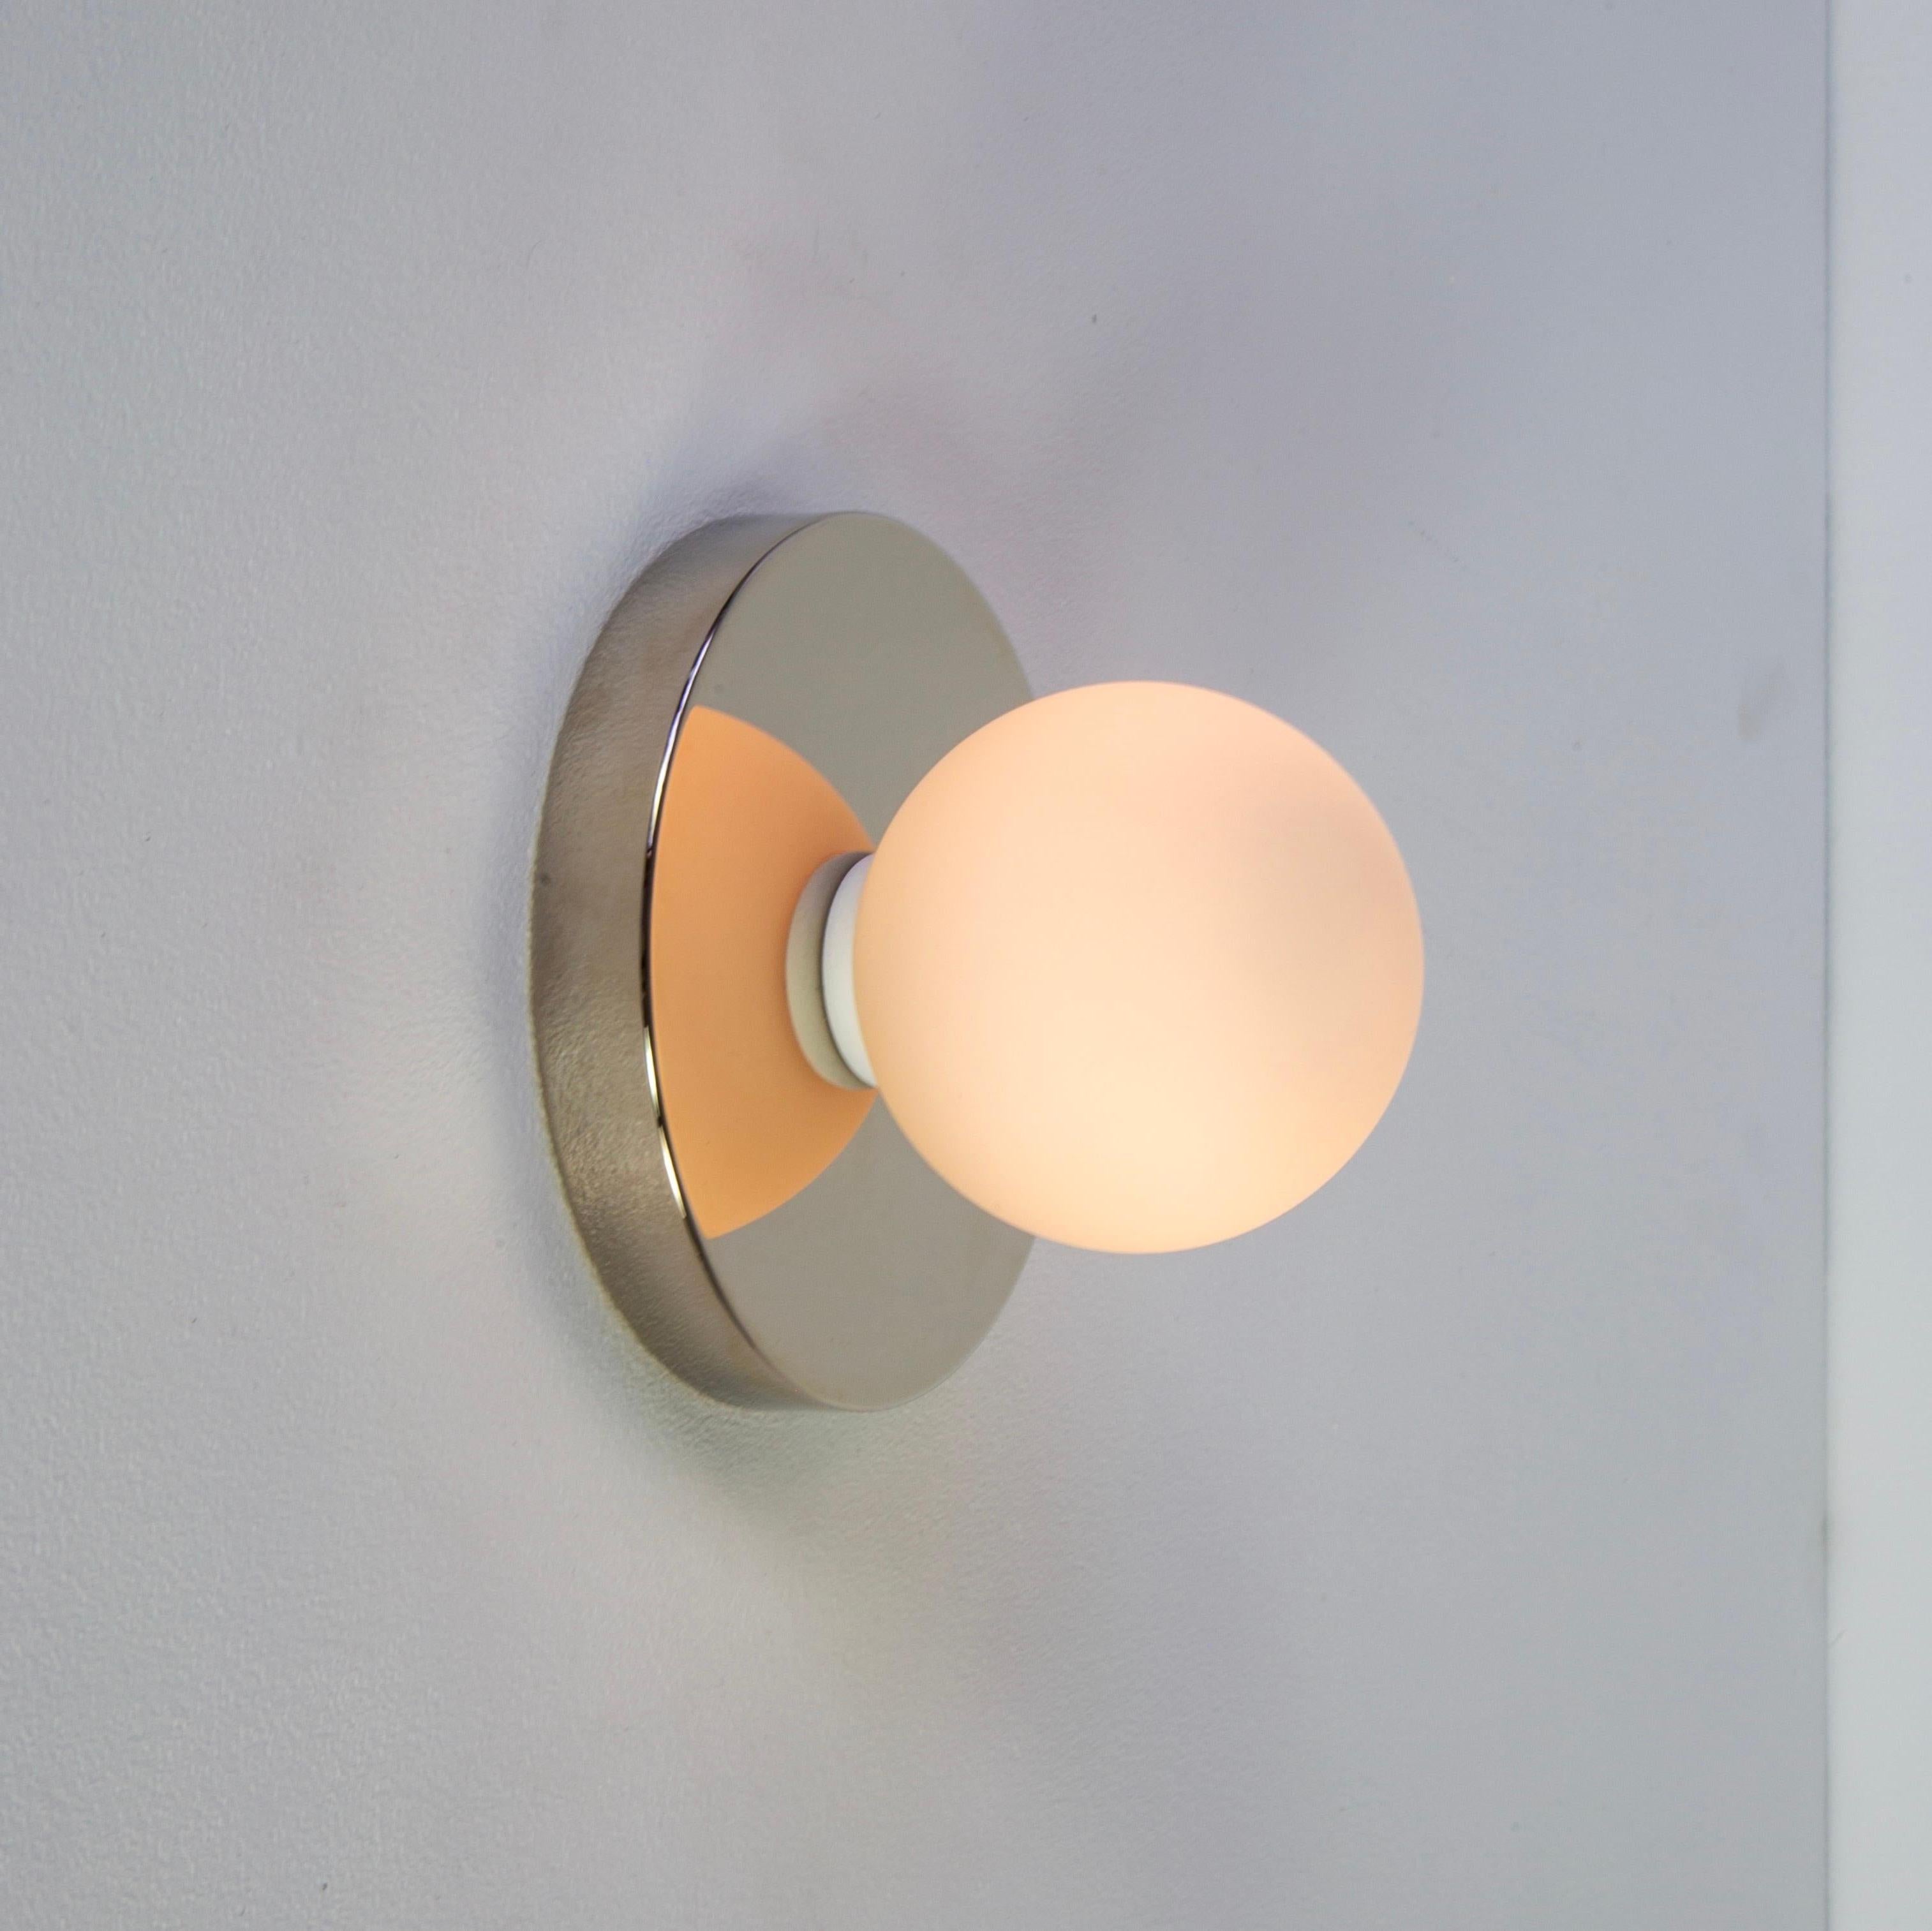 This listing is for 2x Globe Sconces in polished nickel designed and manufactured by Research.Lighting.

Materials: Brass, Steel & Glass
Finish: Polished Nickel 
Electronics: 1x G9 Socket, 1x 4.5 Watt LED Bulb (included), 450 Lumens
ADA Compliant.